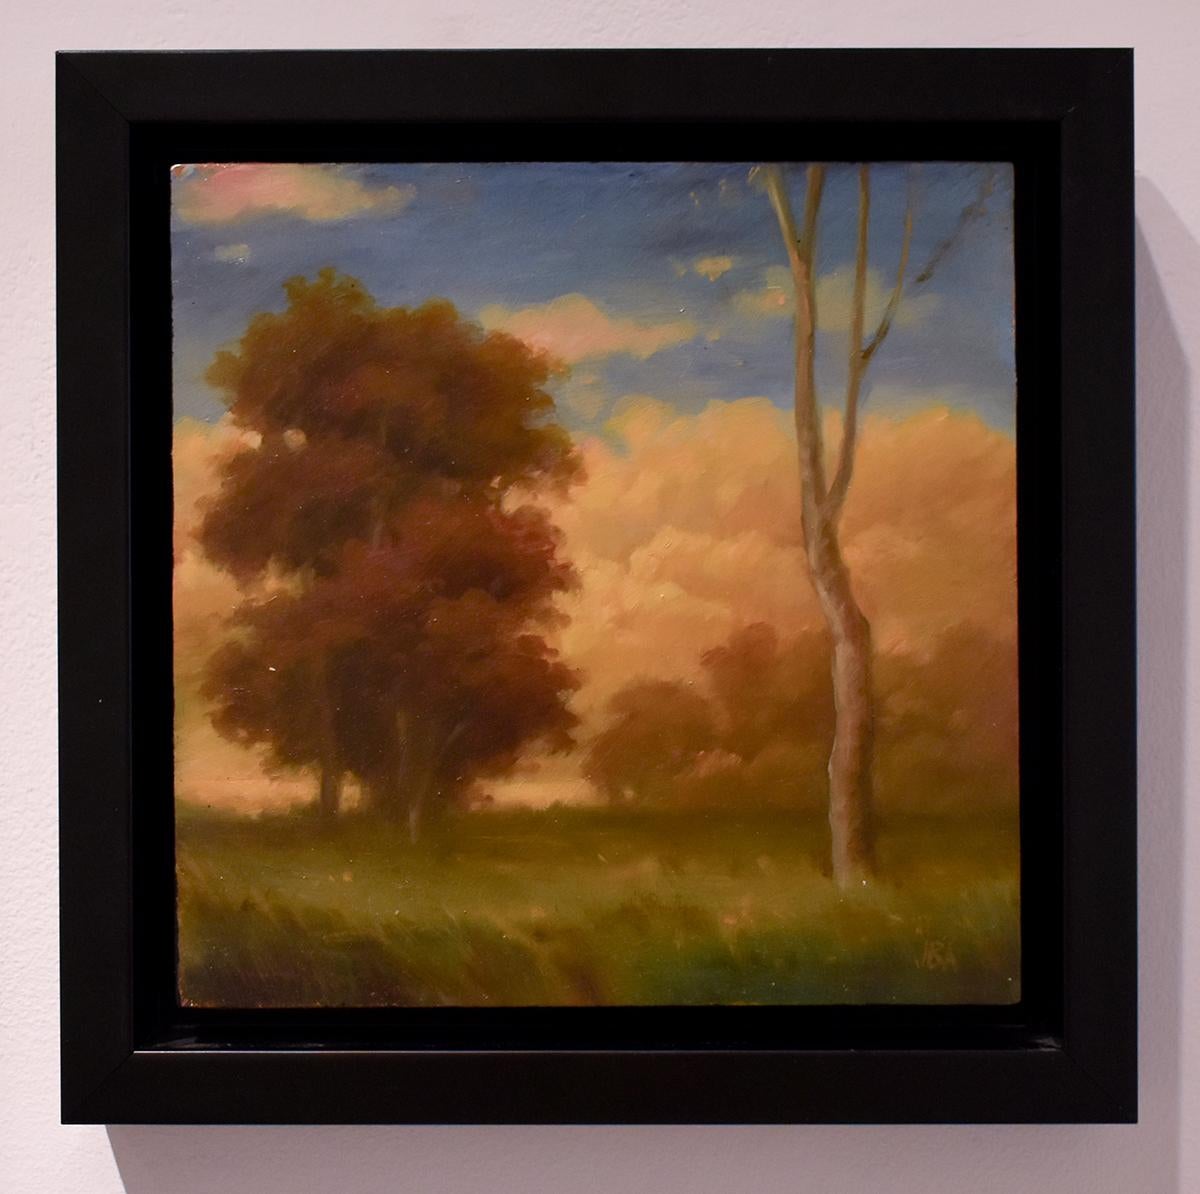 oil on panel
8 x8 inches unframed 
10 x 10 inches framed 

A  landscape view of trees in a meadow set against luminous clouds. Golden light streams through the clouds and a heavenly light is reflected on the leafy autumn trees. The wind traveling